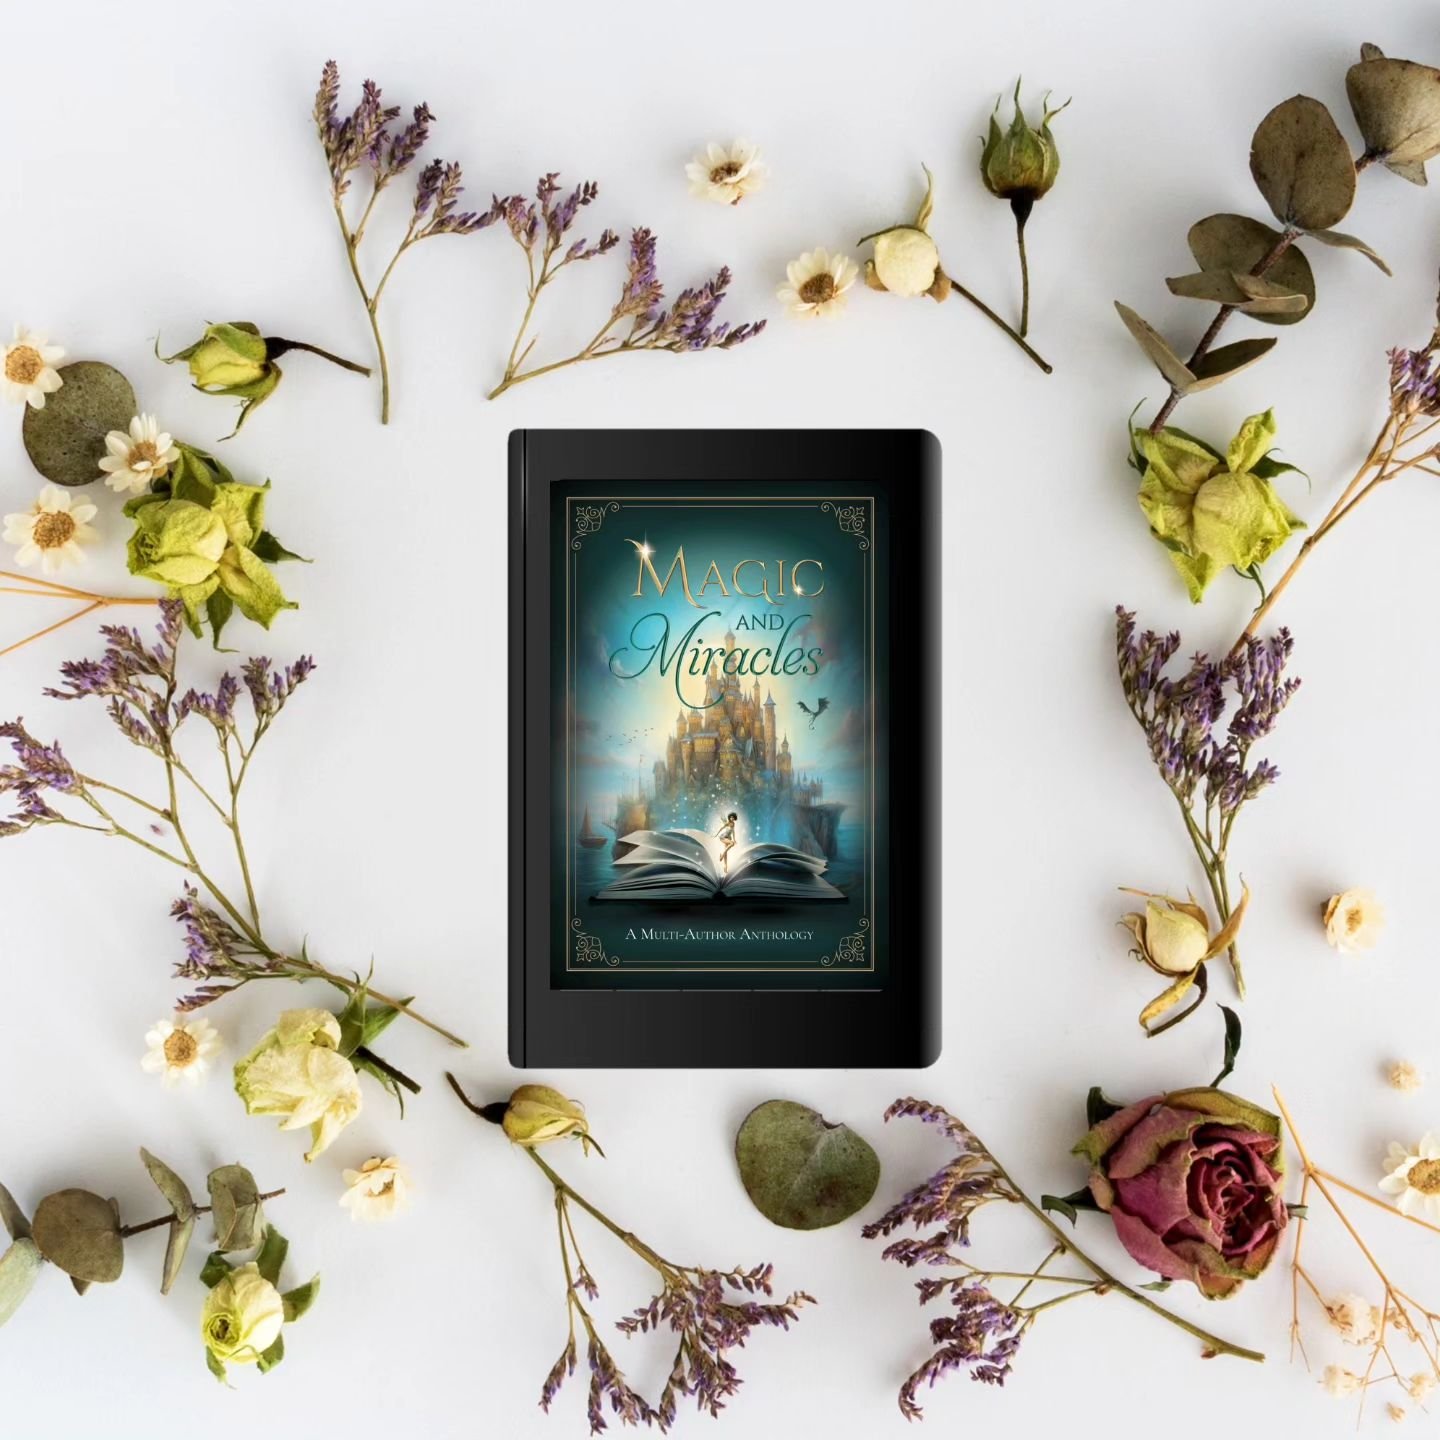 𝗗𝗼 𝘆𝗼𝘂 𝗹𝗶𝗸𝗲 𝘀𝗵𝗼𝗿𝘁 𝘀𝘁𝗼𝗿𝗶𝗲𝘀?⁣
⁣
Honestly, I don't read them super often. But while my novel heart is set on romance, I actually really love a good horror short fiction. (Romance and horror are actually very similar in the fact that